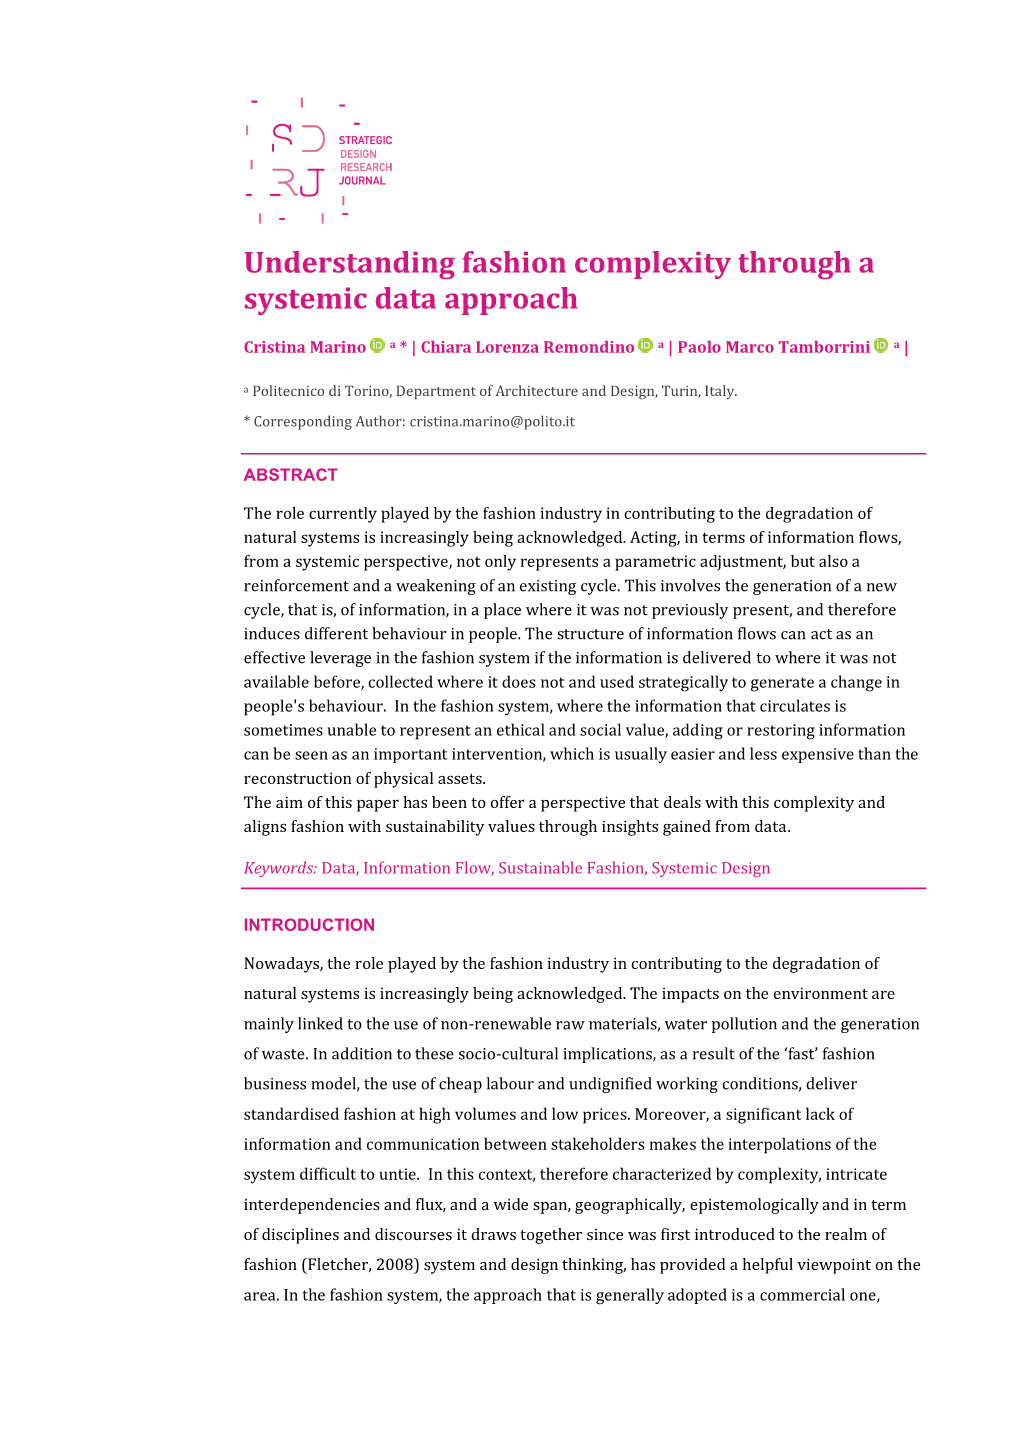 Understanding Fashion Complexity Through a Systemic Data Approach